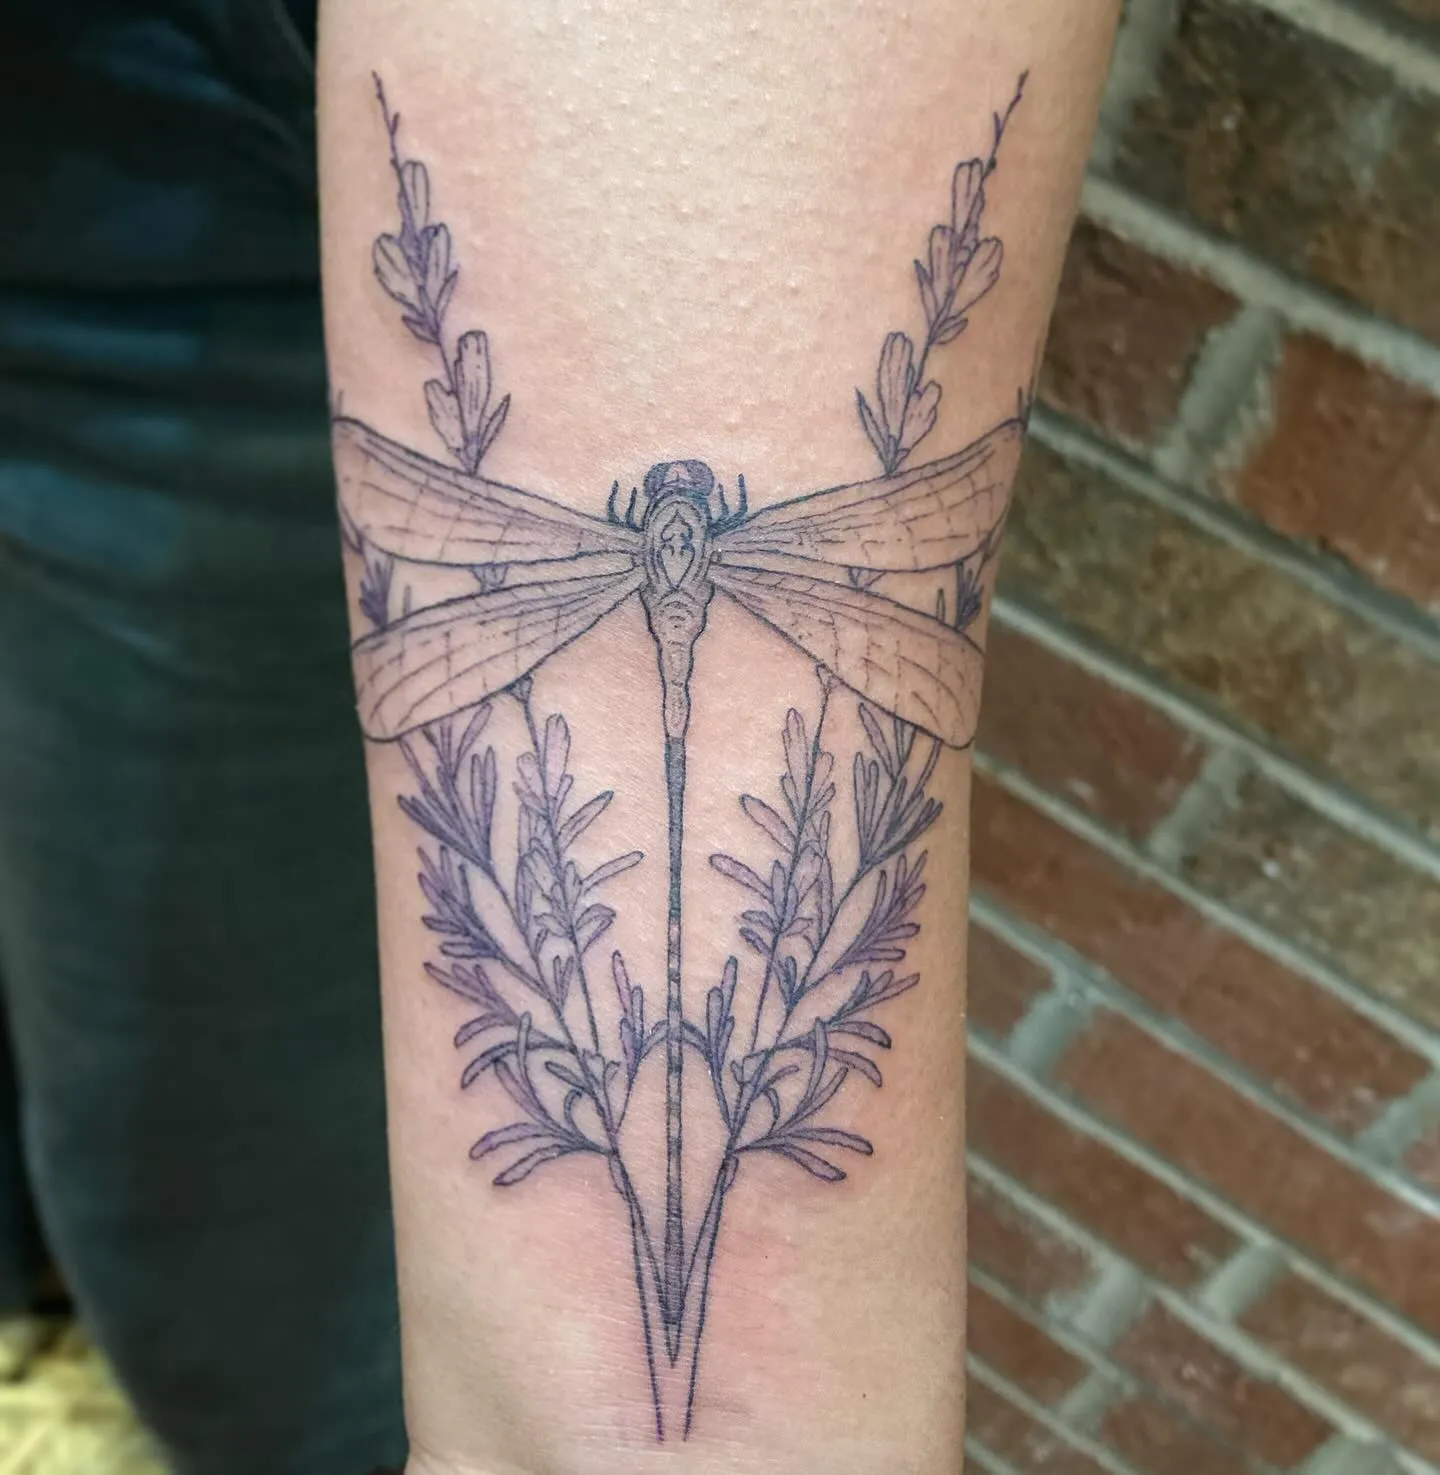 Rosemary Bunch with Dragonfly Leg Tattoo